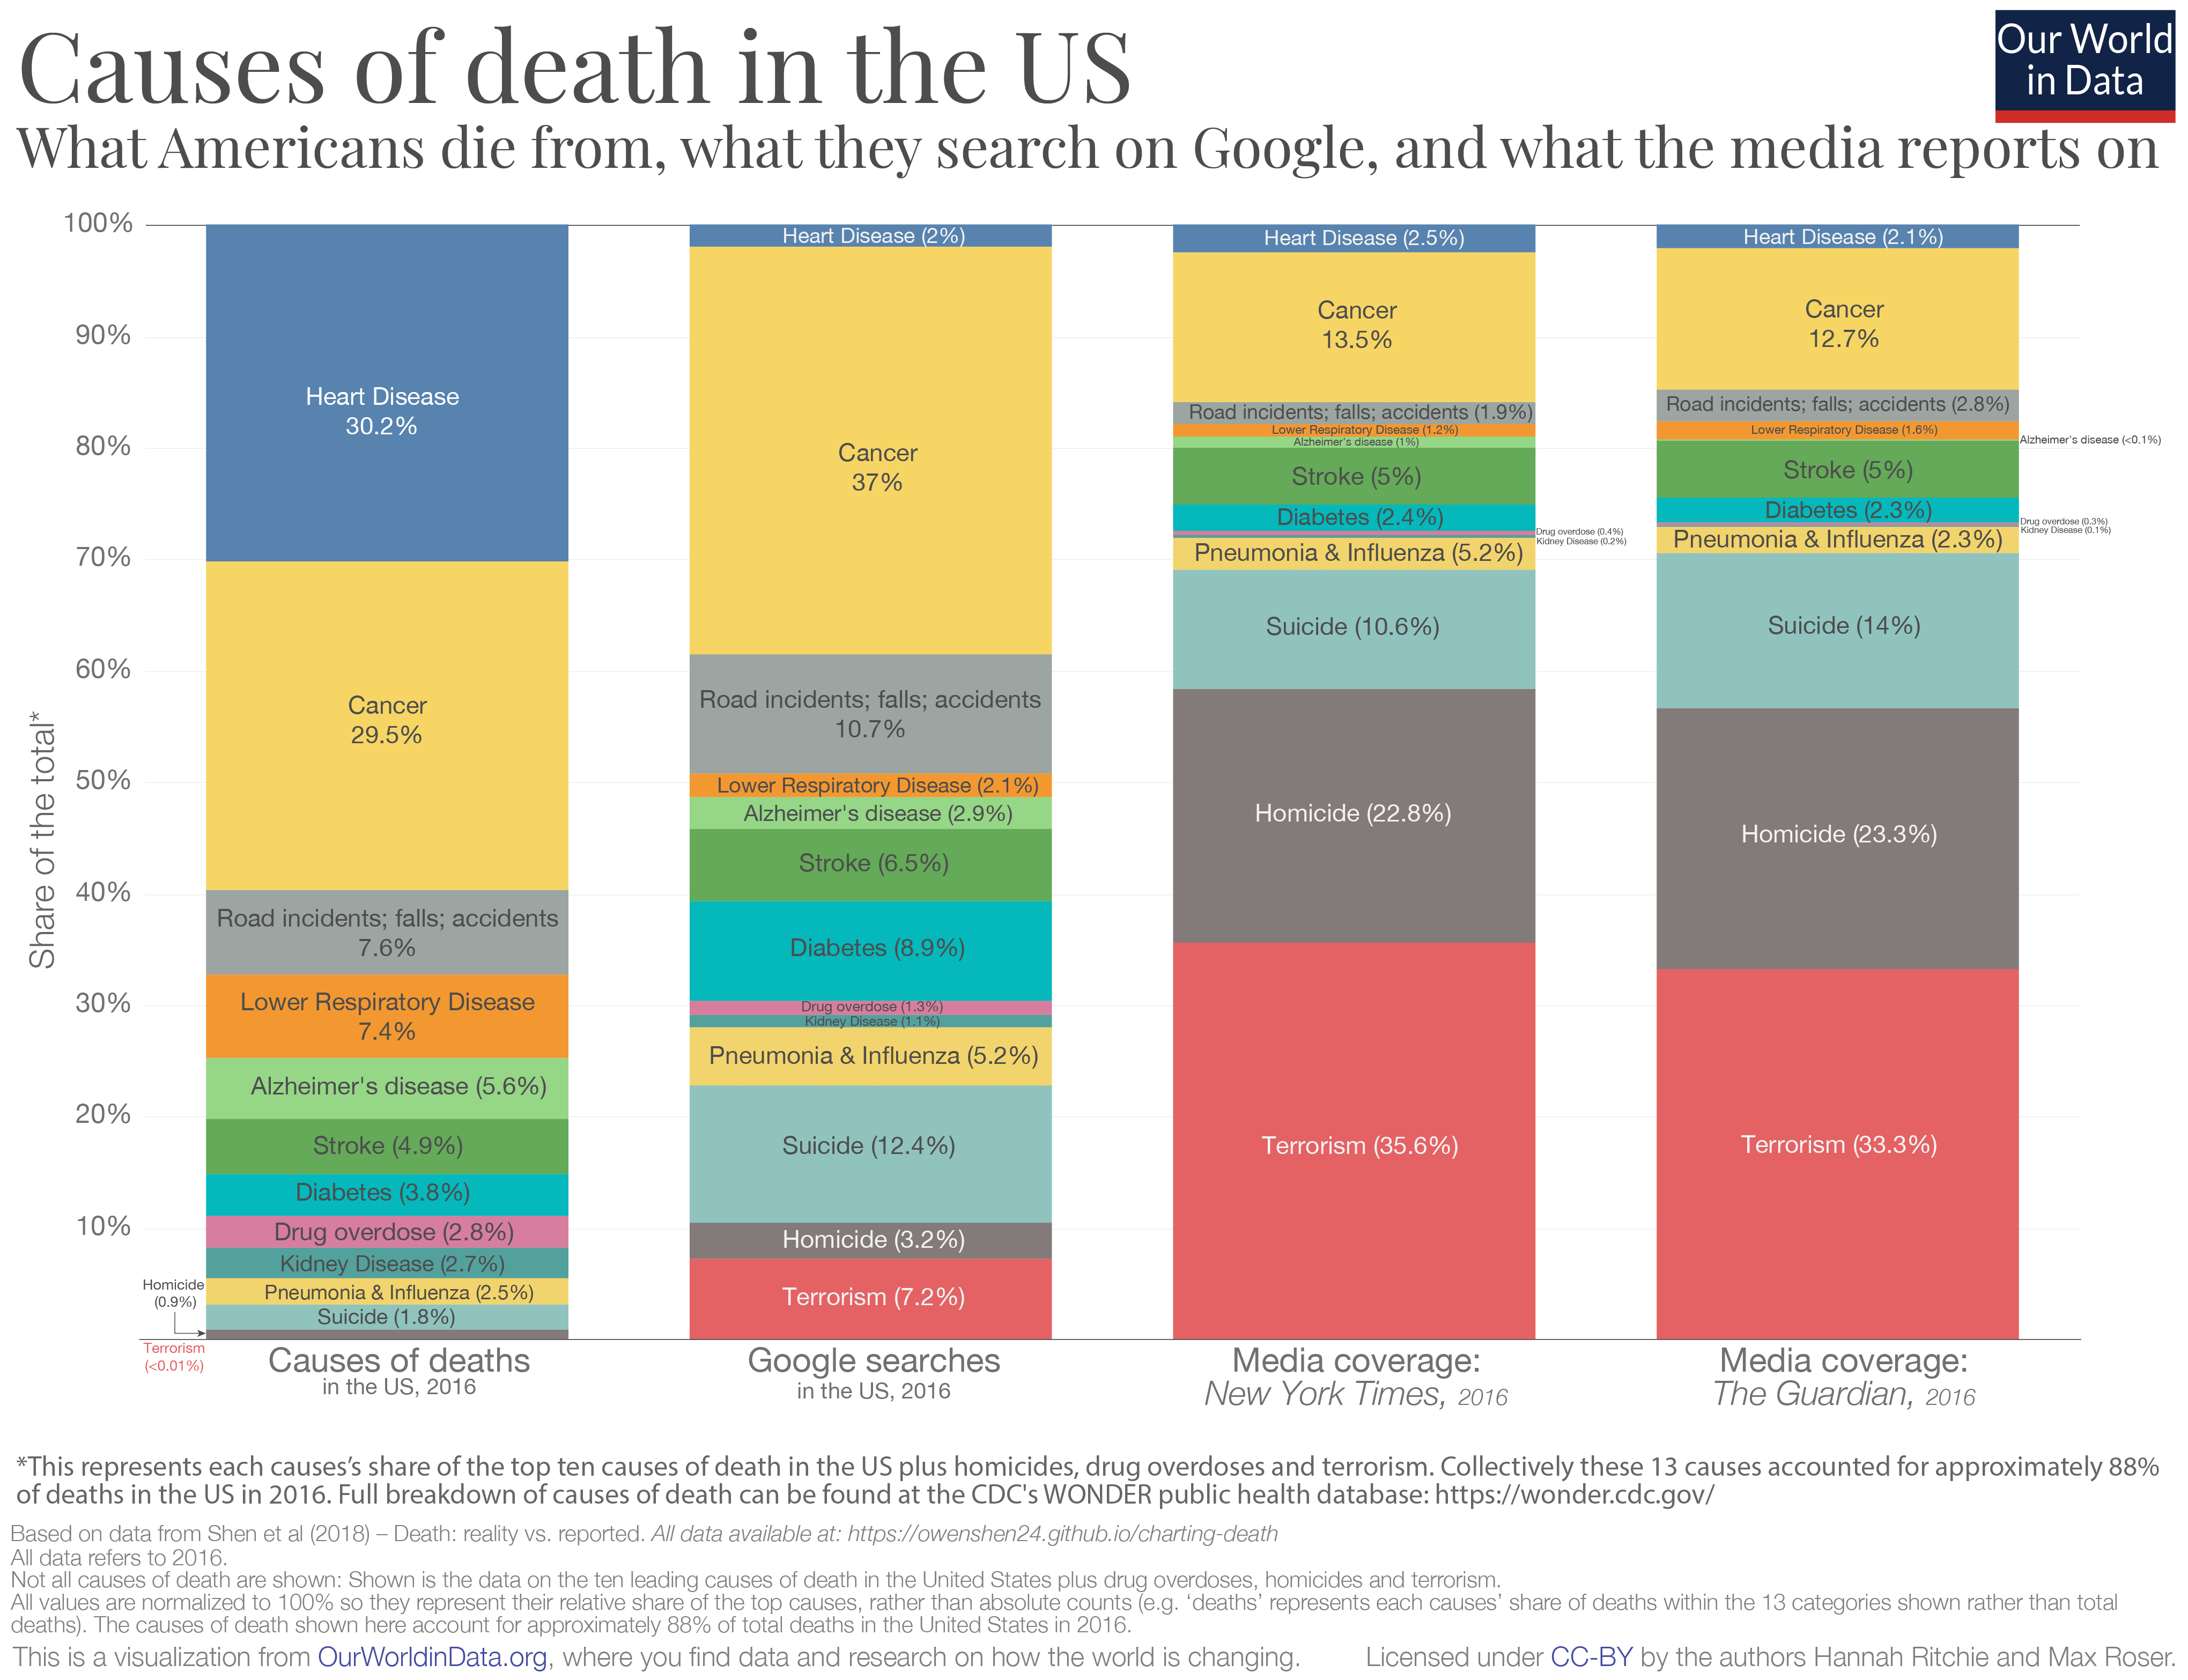 Causes-of-death-in-USA-vs.-media-coverage